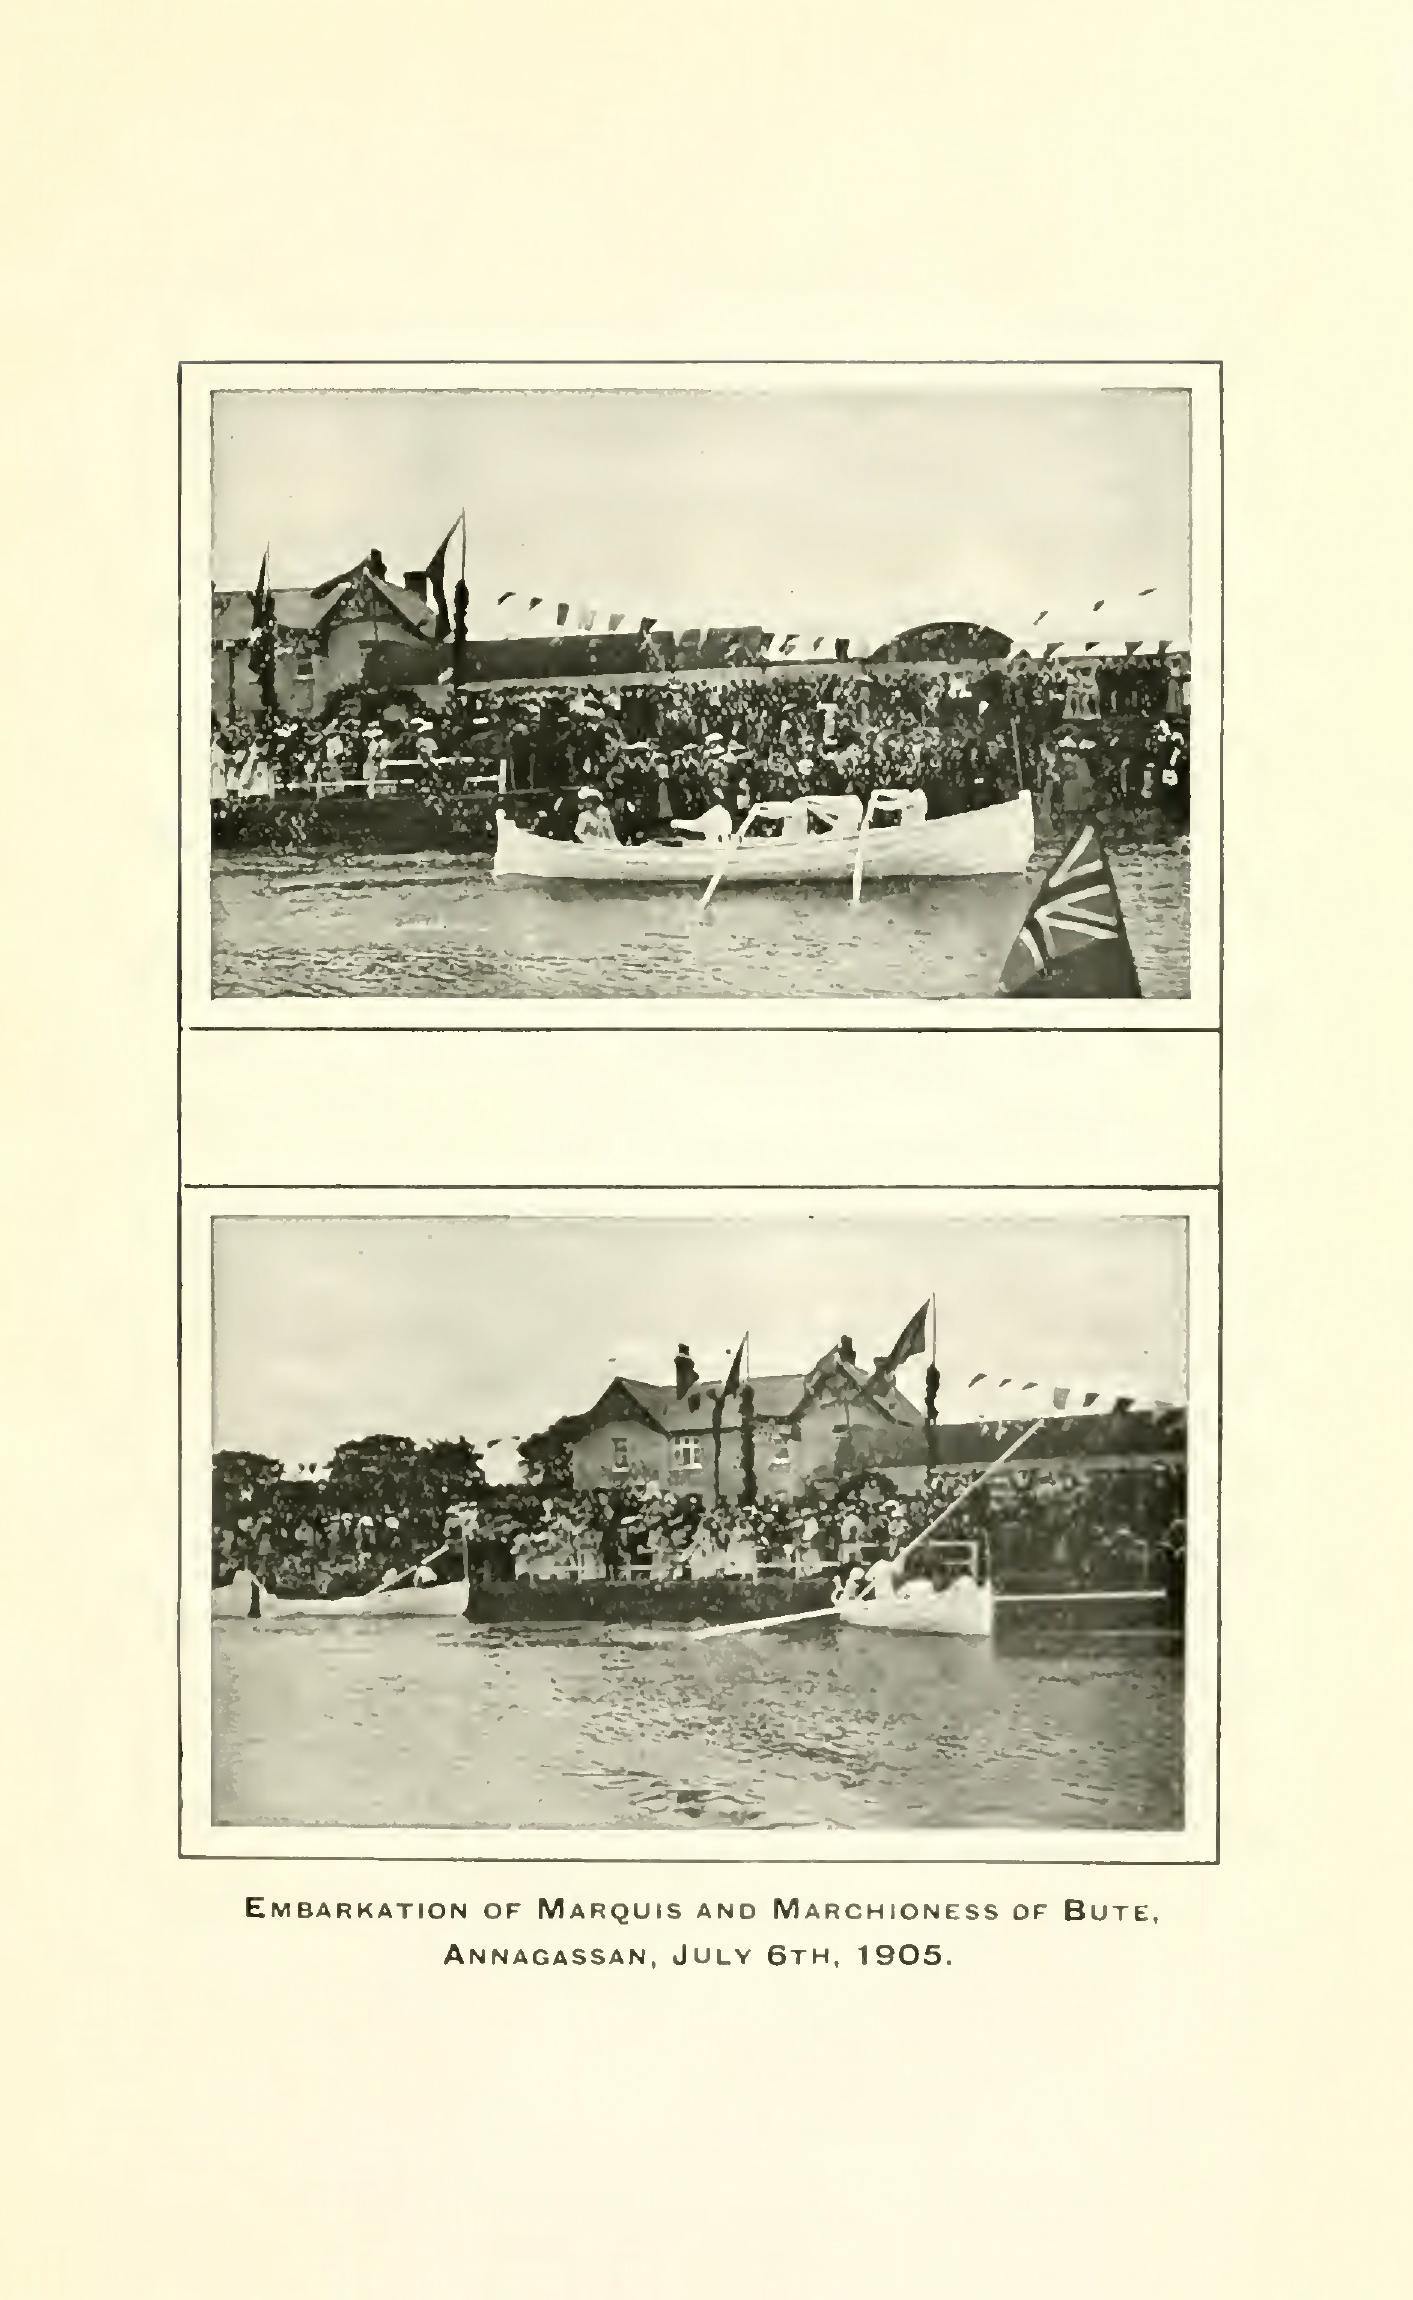 Embarkation of Marquis and Marchioness of Bute. Annagassen, July 6, 1905. in: James Blennerhassett Leslie. 1908. History of Kilsaran Union of Parishes in the County of Louth. Dundalk: William Tempest.